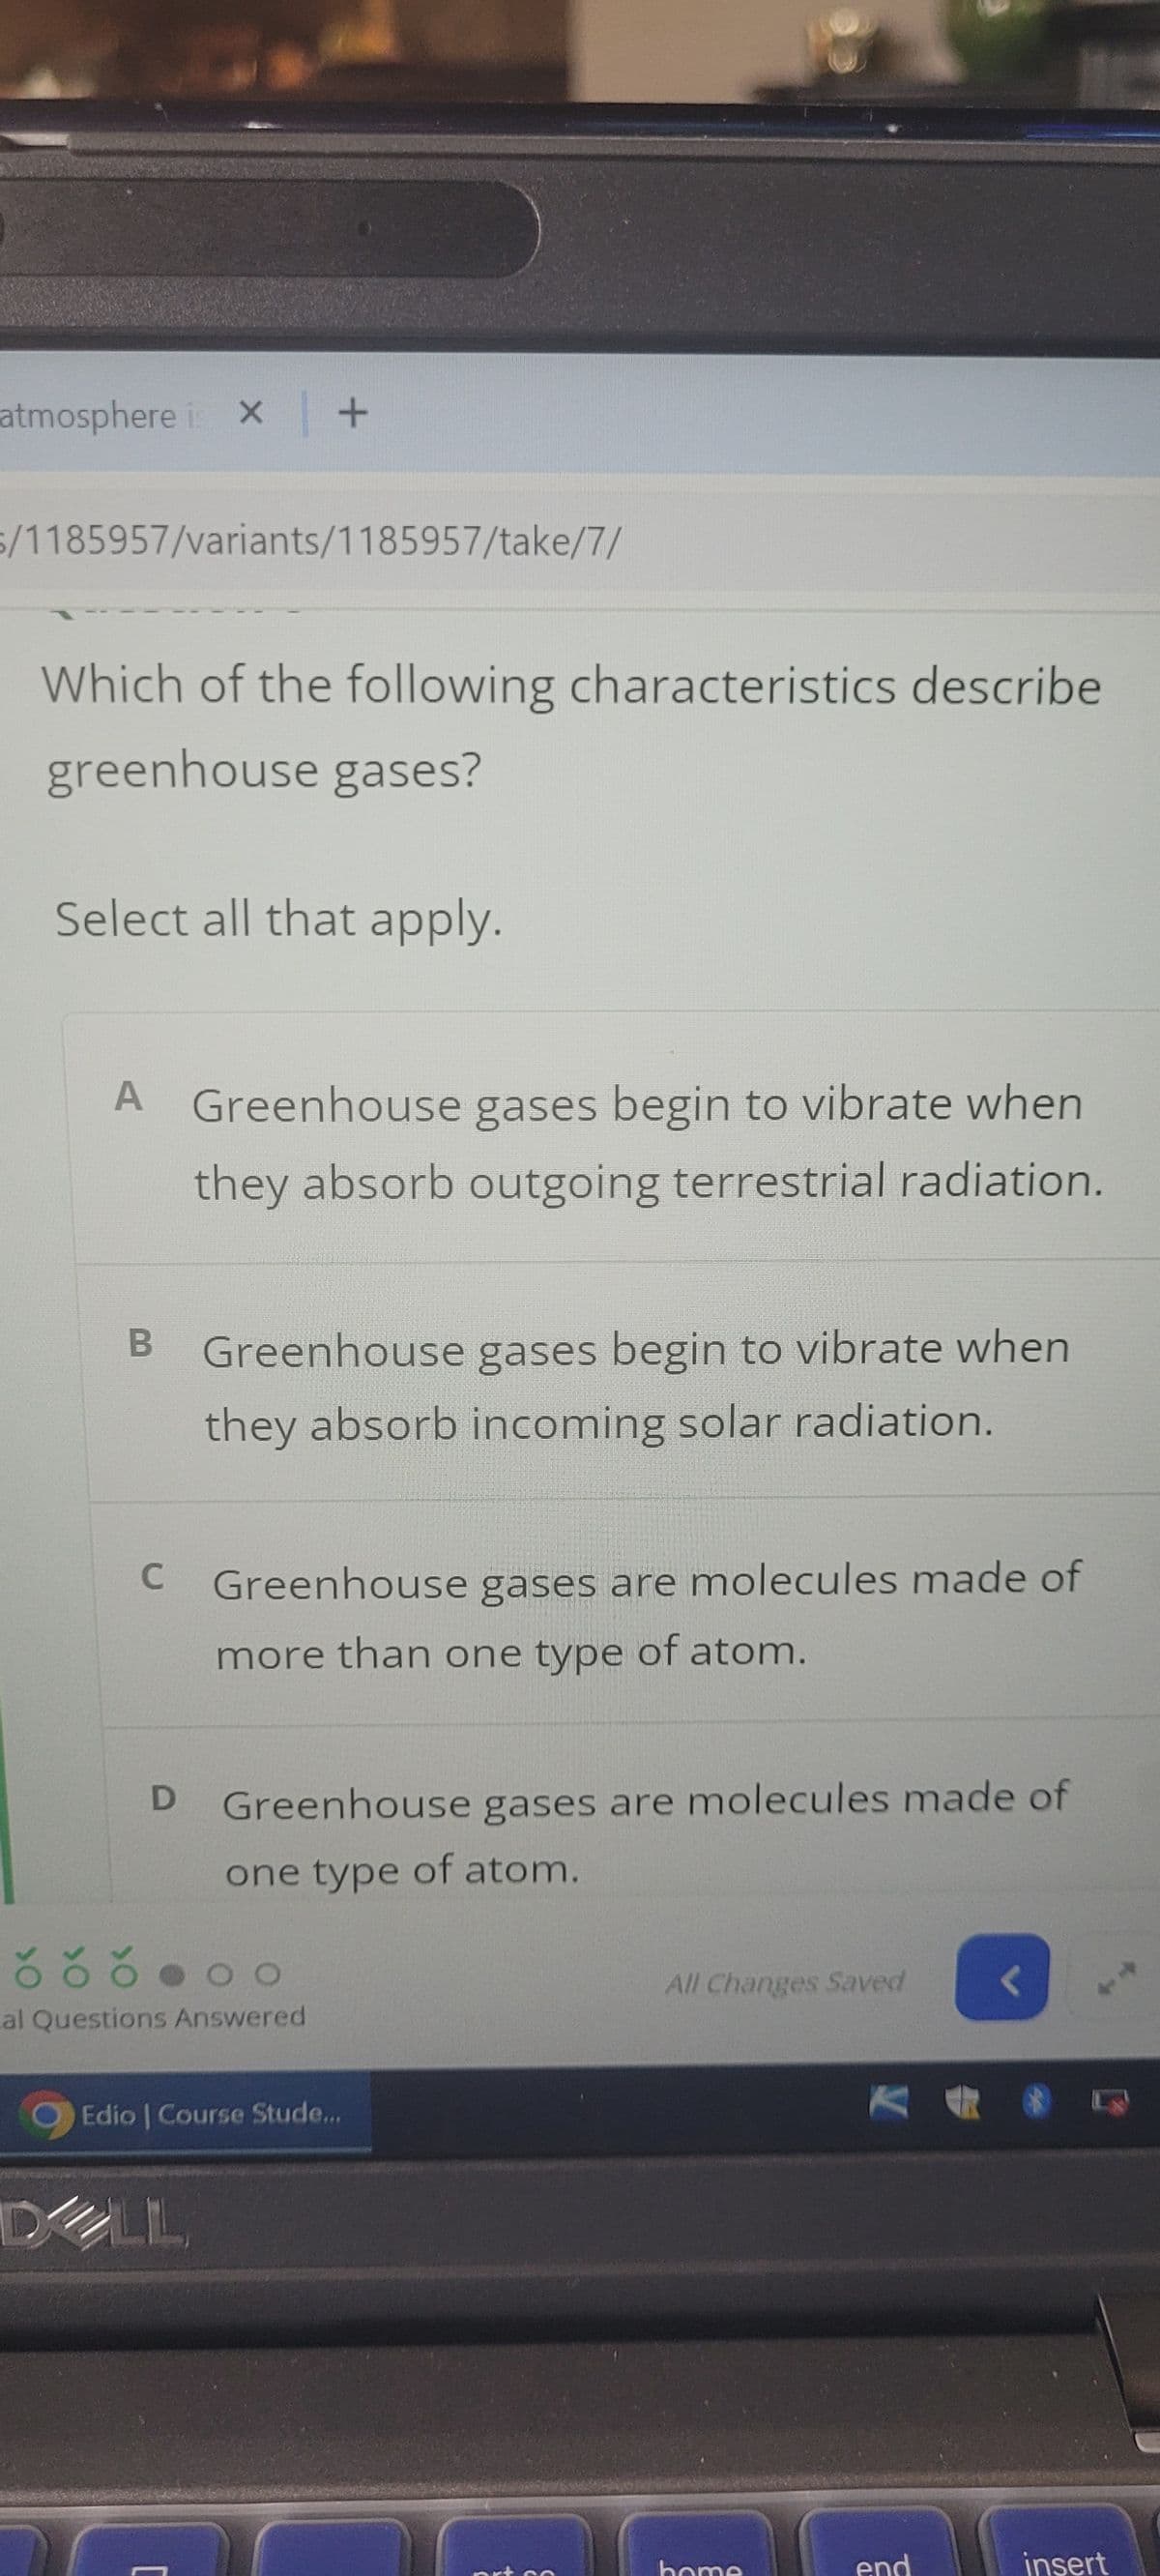 atmosphere is x | +
/1185957/variants/1185957/take/7/
Which of the following characteristics describe
greenhouse gases?
Select all that apply.
A Greenhouse gases begin to vibrate when
they absorb outgoing terrestrial radiation.
B Greenhouse gases begin to vibrate when
they absorb incoming solar radiation.
C Greenhouse gases are molecules made of
more than one type of atom.
D
Greenhouse gases are molecules made of
one type of atom.
al Questions Answered
Edio | Course Stude...
LIL
All Changes Saved
insert